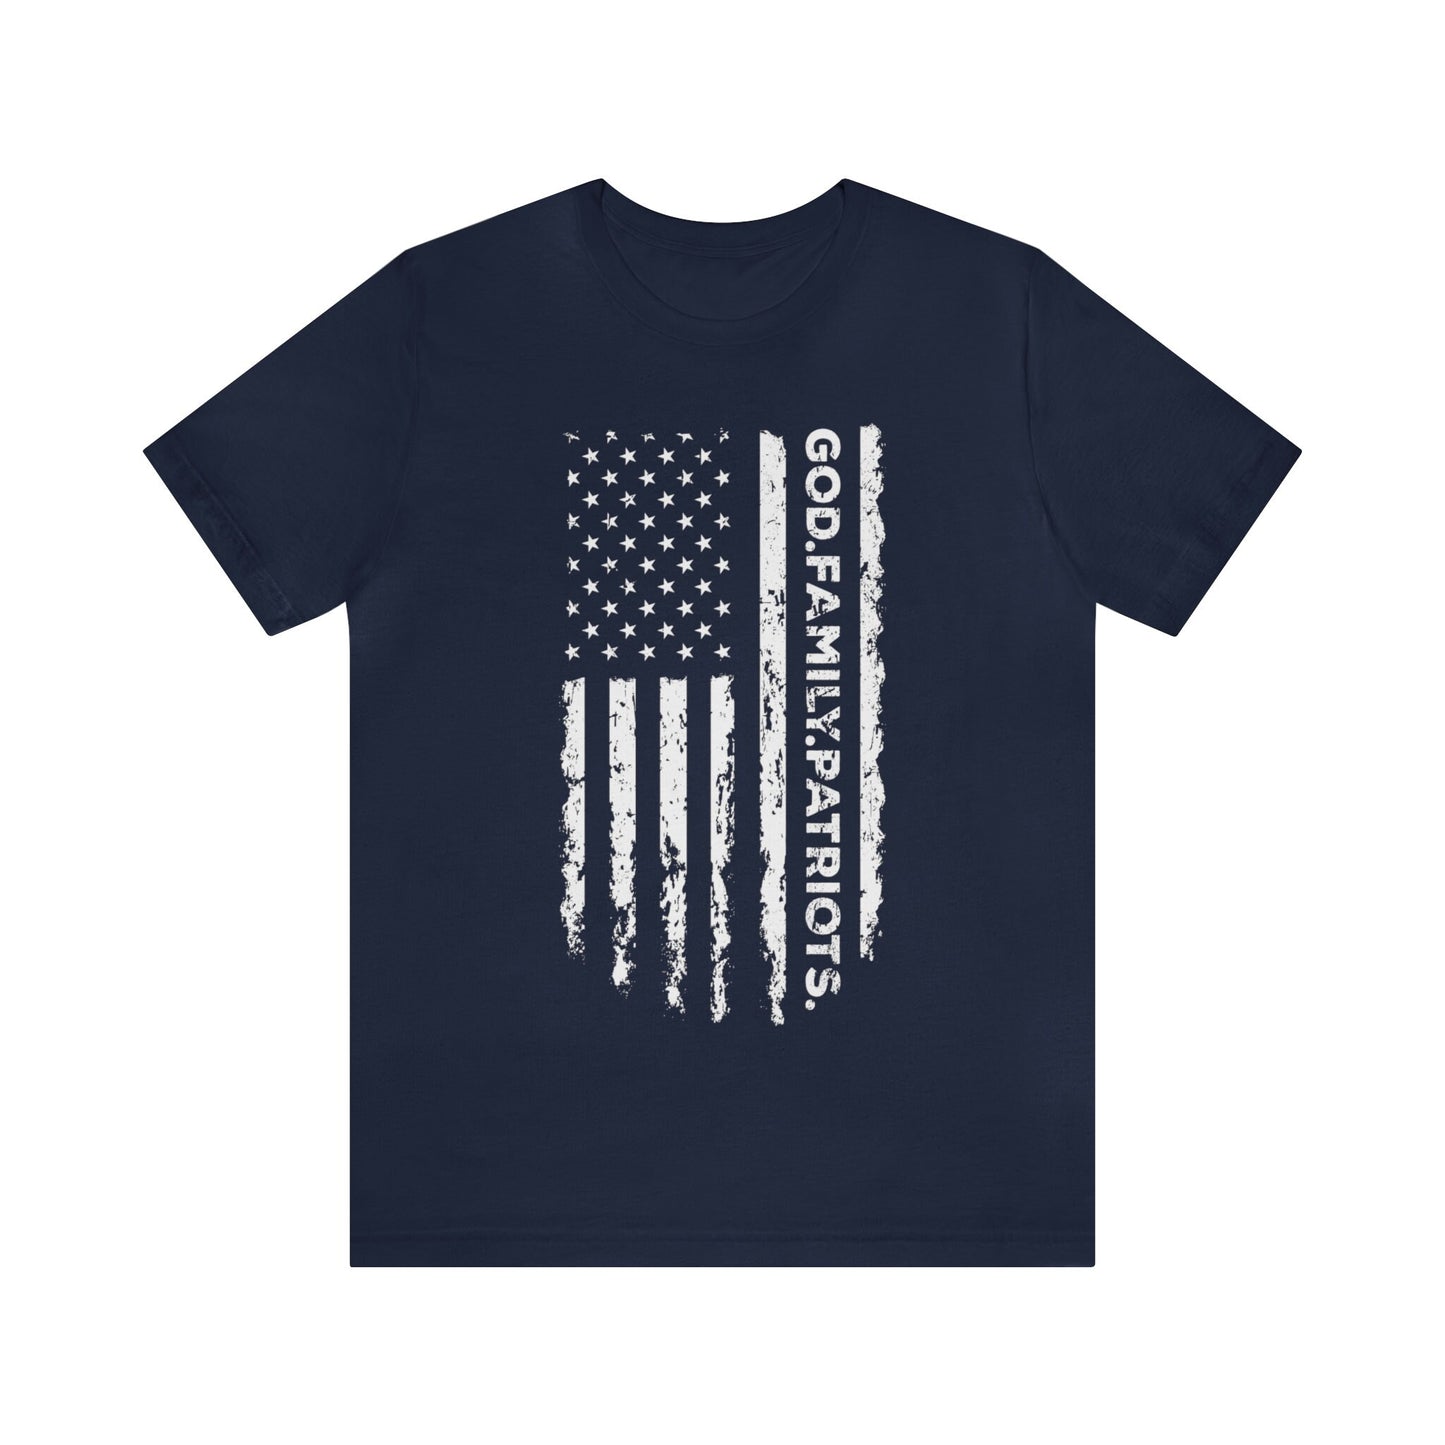 Patriotic gift t-shirt for all who are proud of our brave soldiers and troops